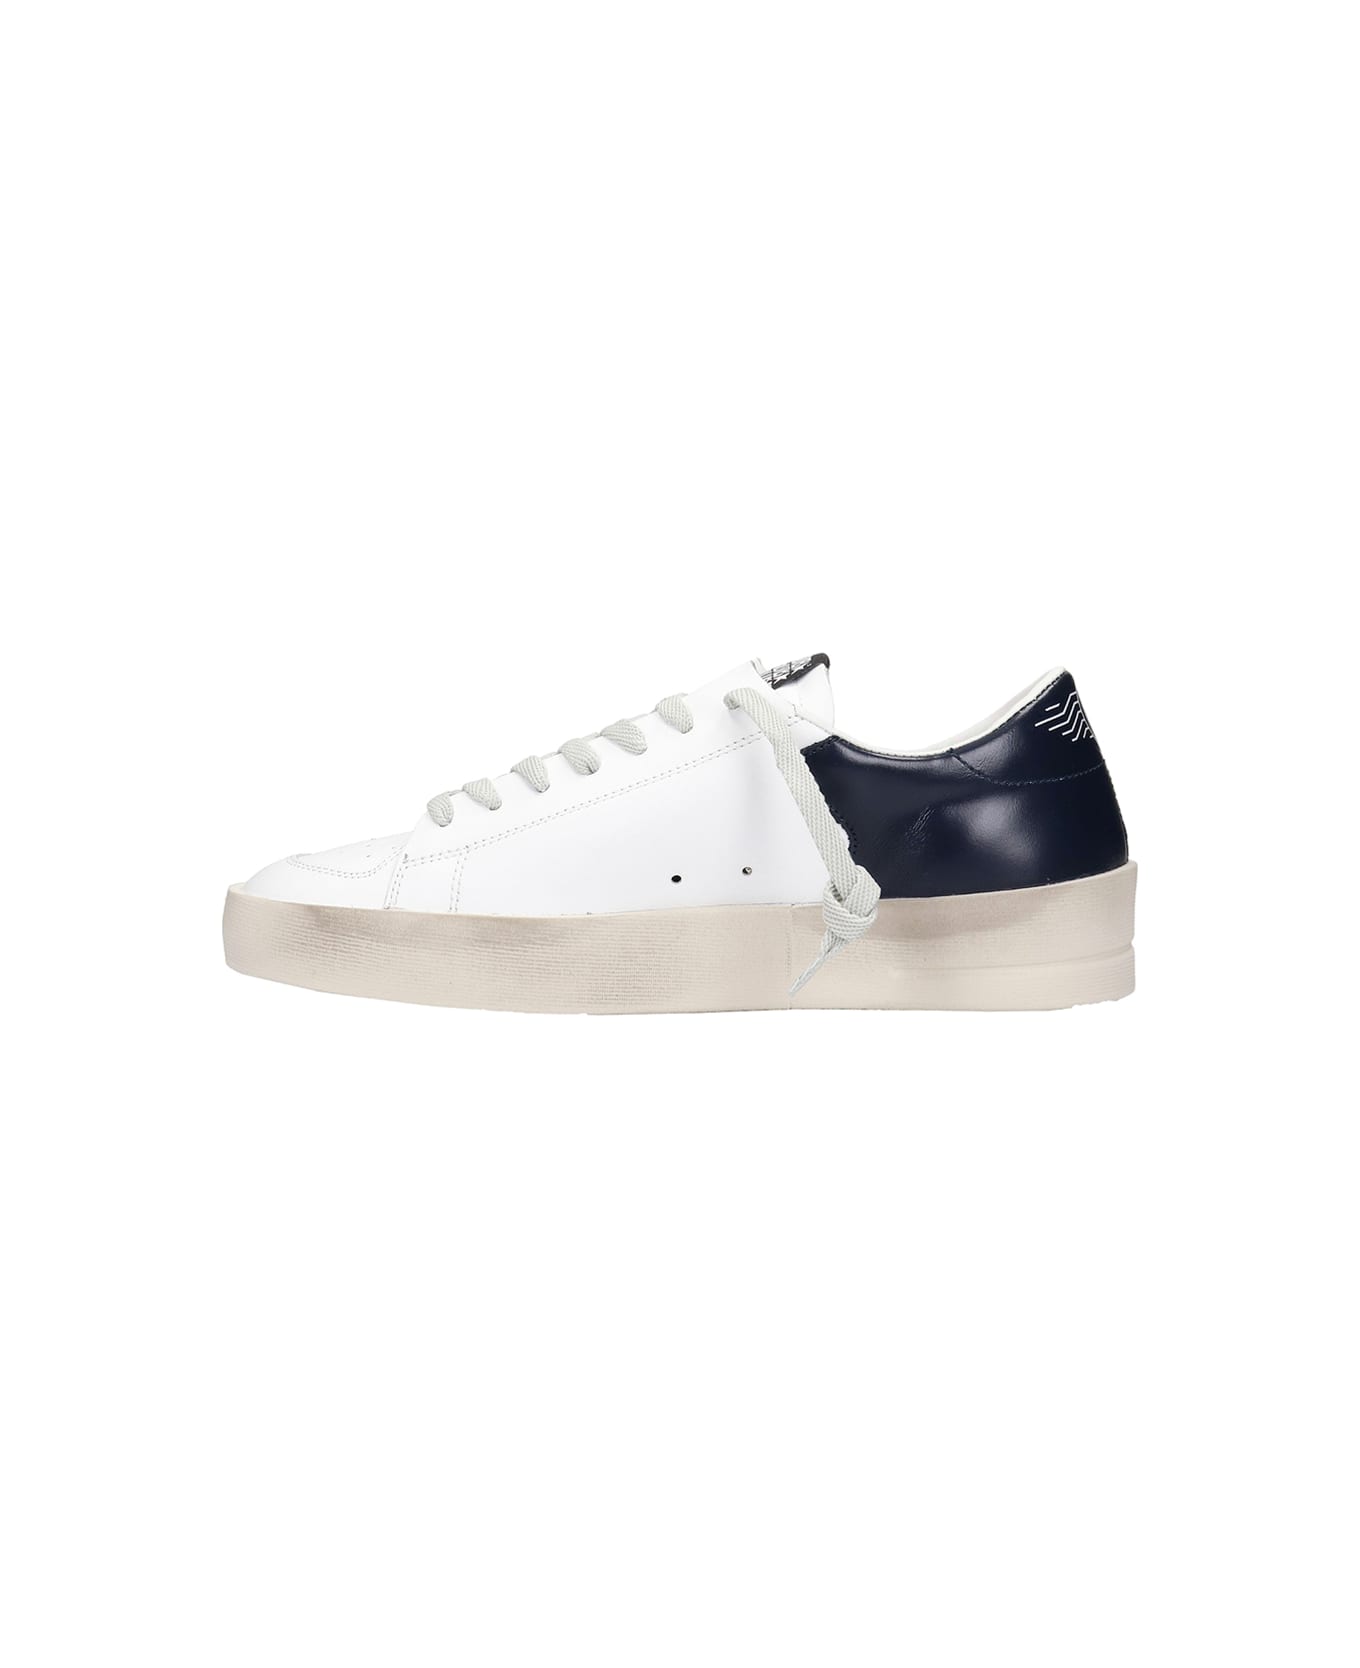 Golden Goose Stardan Leather Upper Suede Star Shiny Leather Heel - White Ice Blue